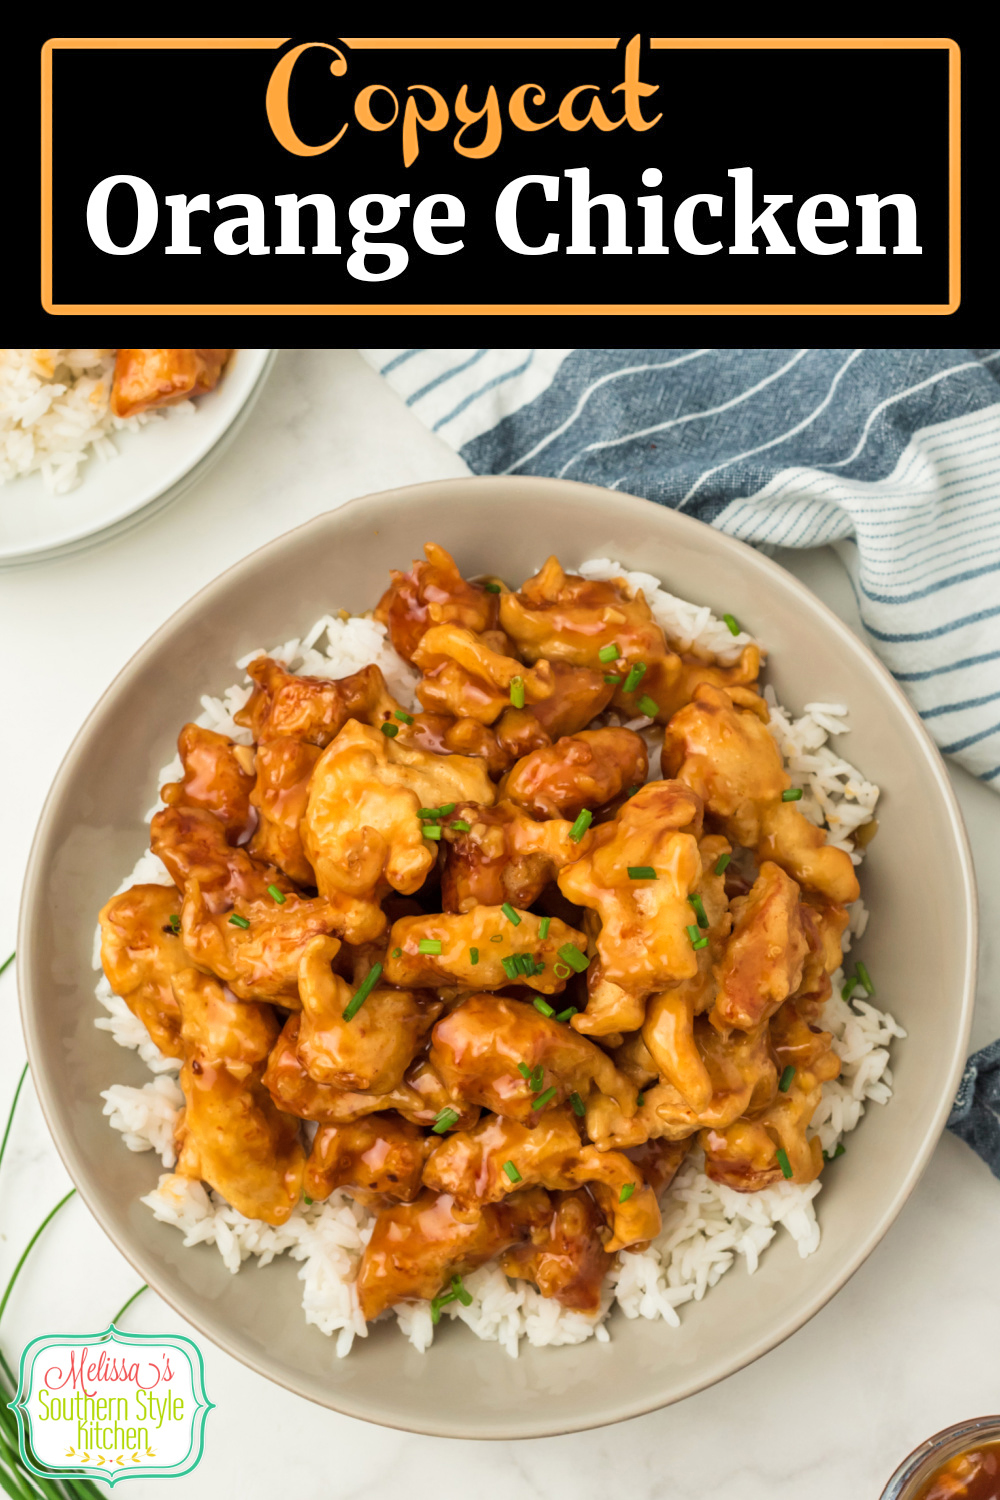 Saved money and time and make your own copycat Panda Express Orange Chicken at home #orangechicken #copycatrecipes #easychickenrecipes #asianchicken #pandaexpresschicken #orangesauce #easyorangechicken